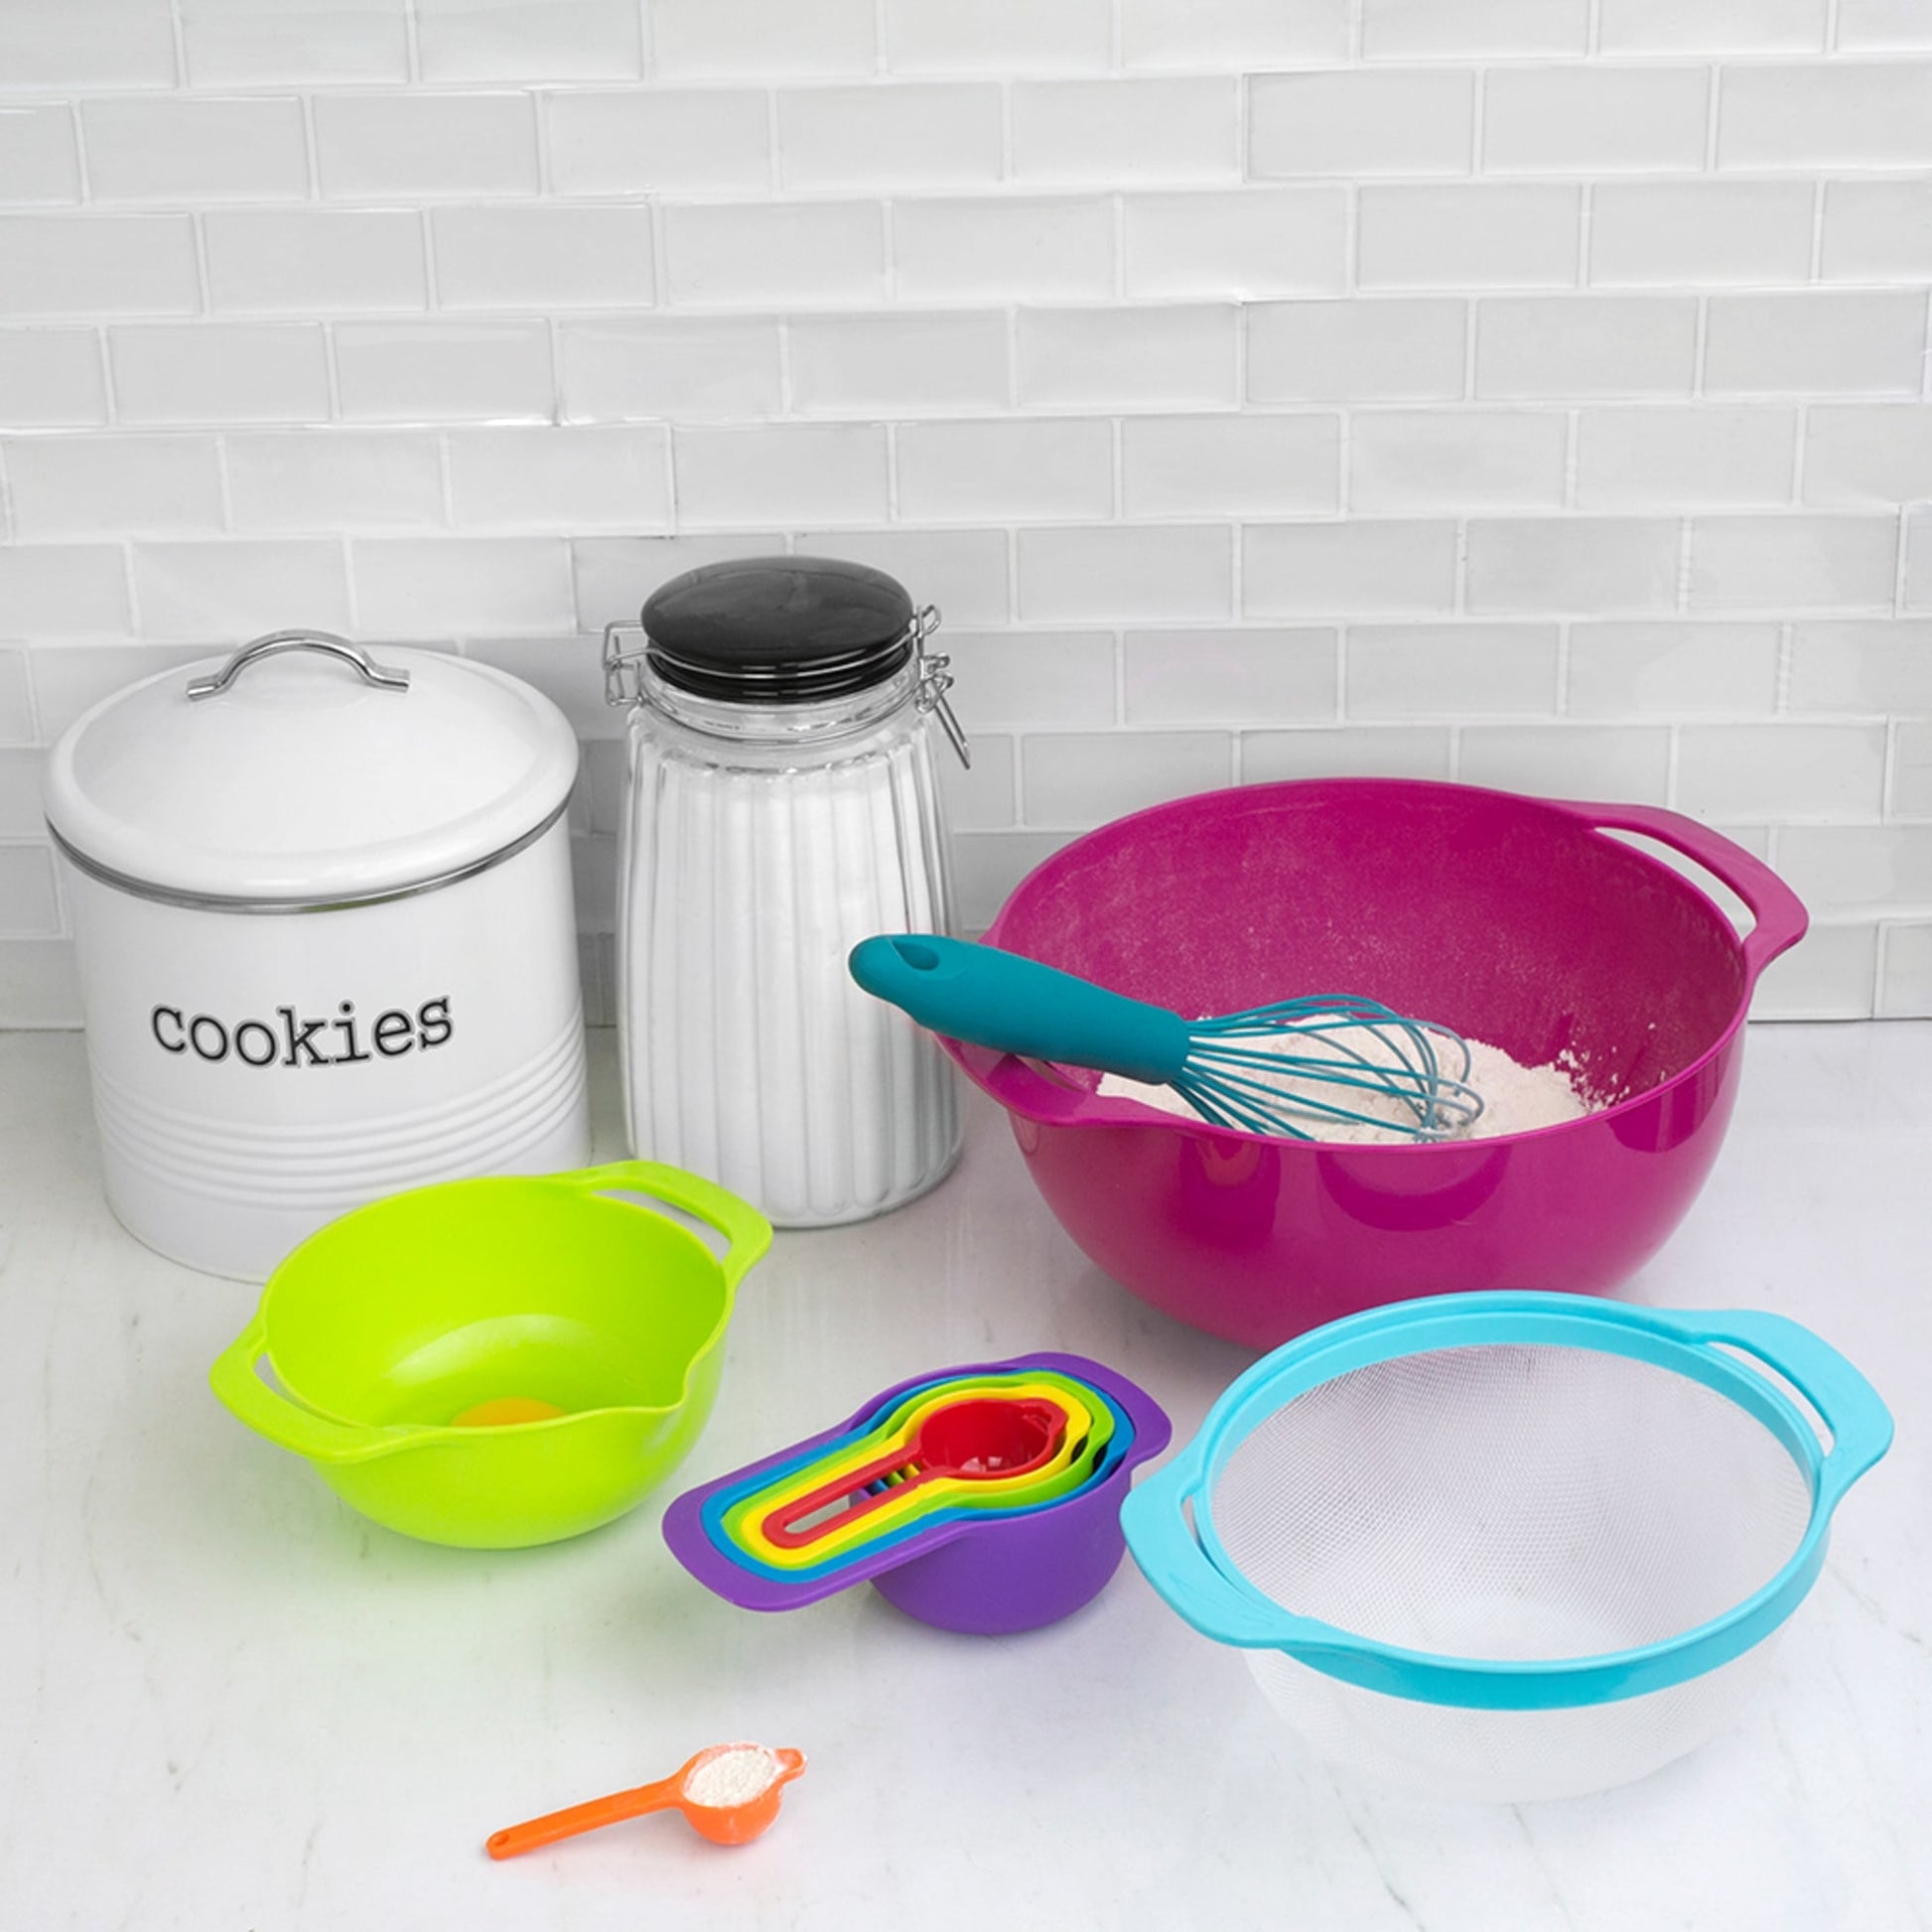 COOK WITH COLOR Prep Bowls - 8 Piece Nesting Plastic Meal Prep